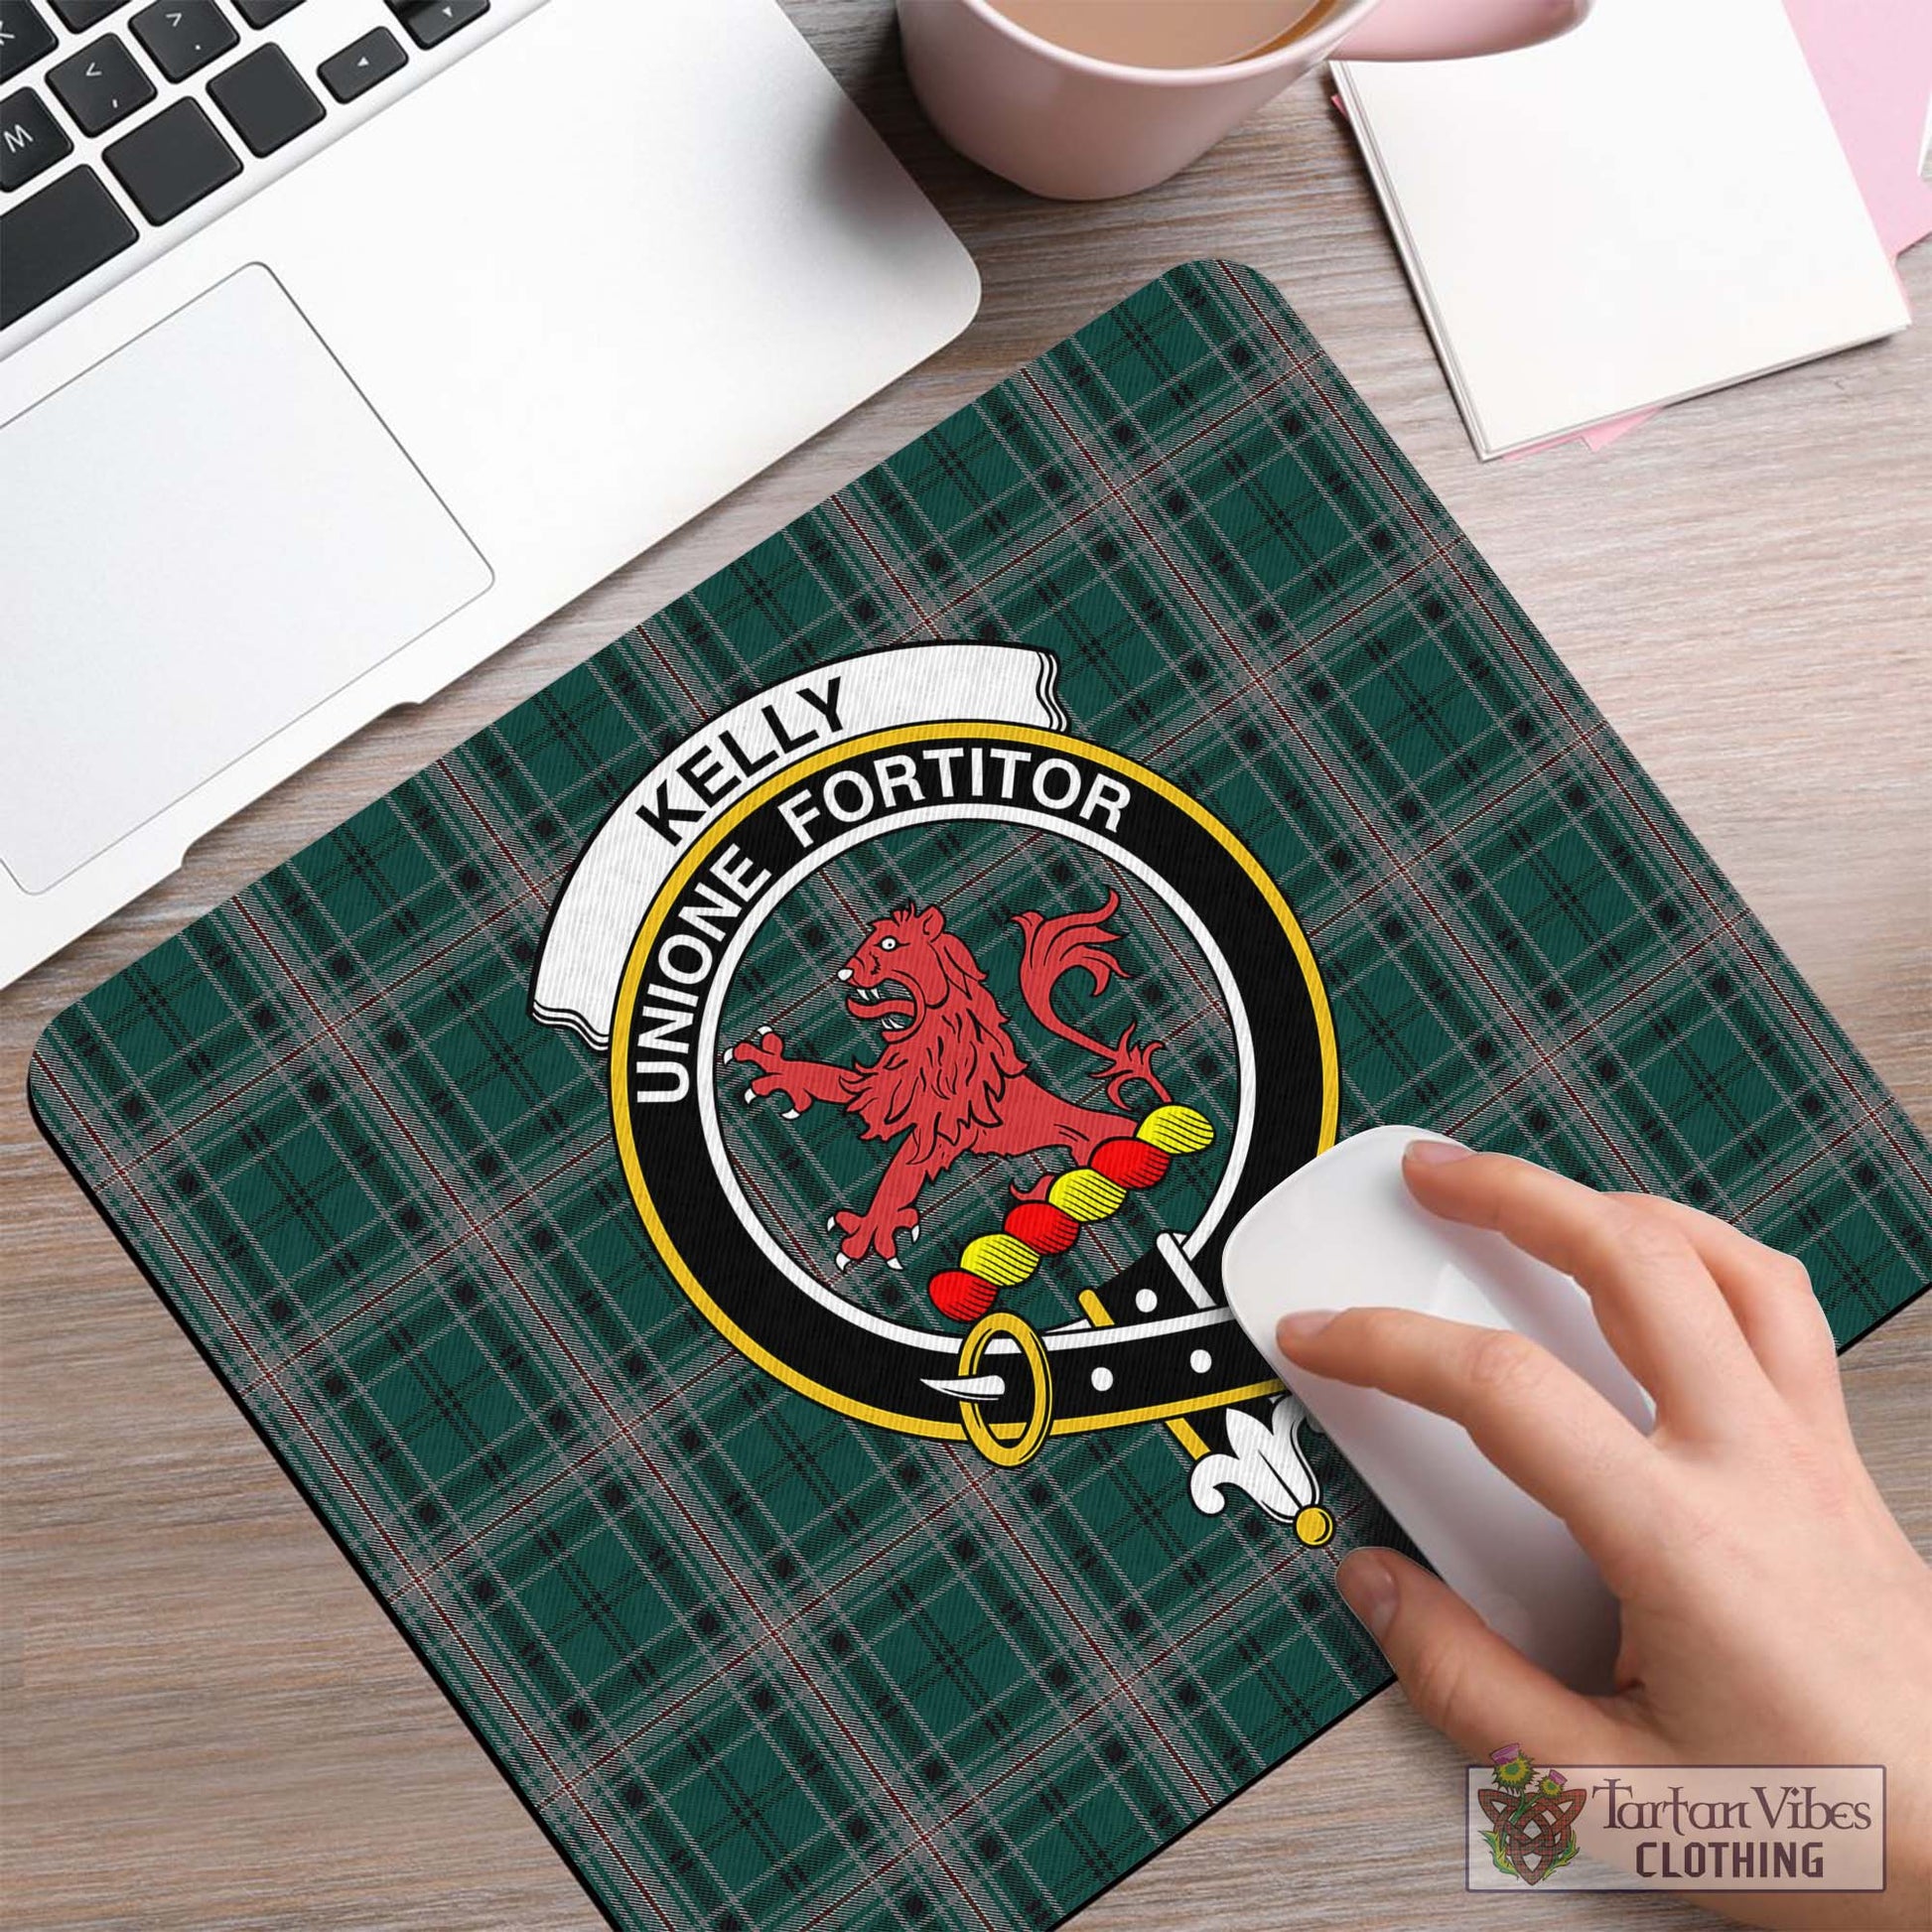 Tartan Vibes Clothing Kelly of Sleat Hunting Tartan Mouse Pad with Family Crest